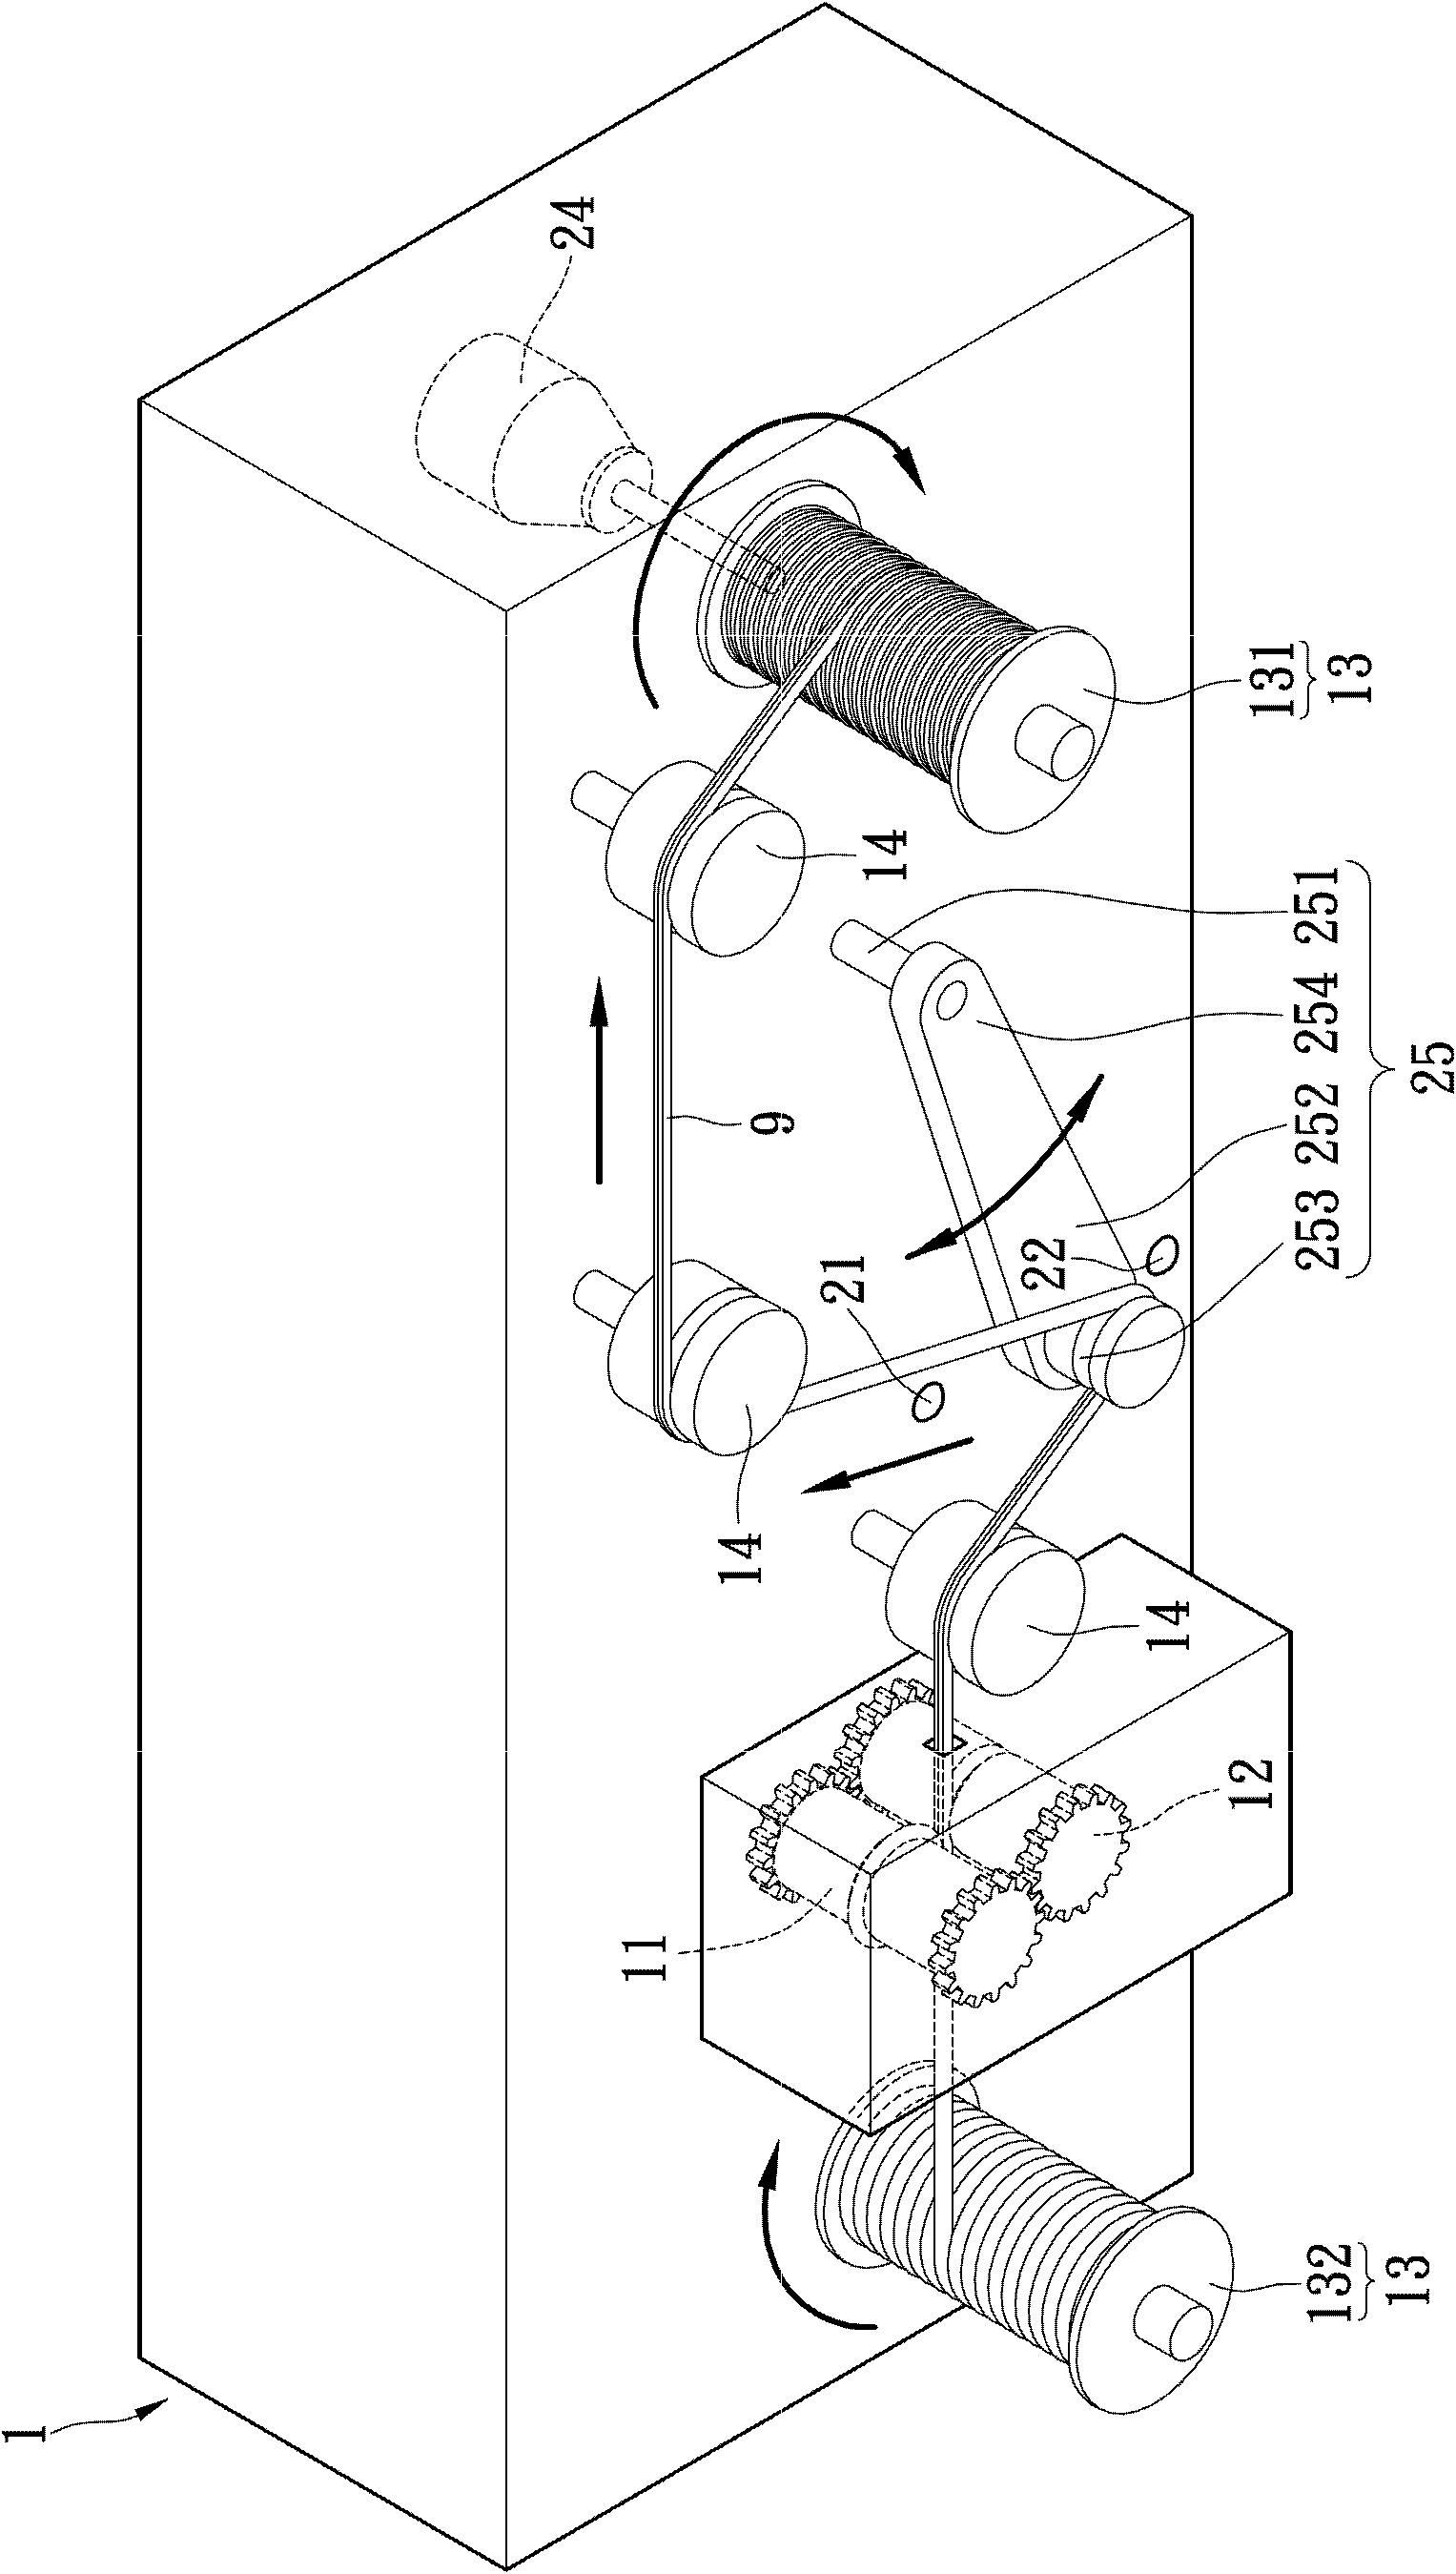 Bonding wire cutting machine and bonding wire cutting control method